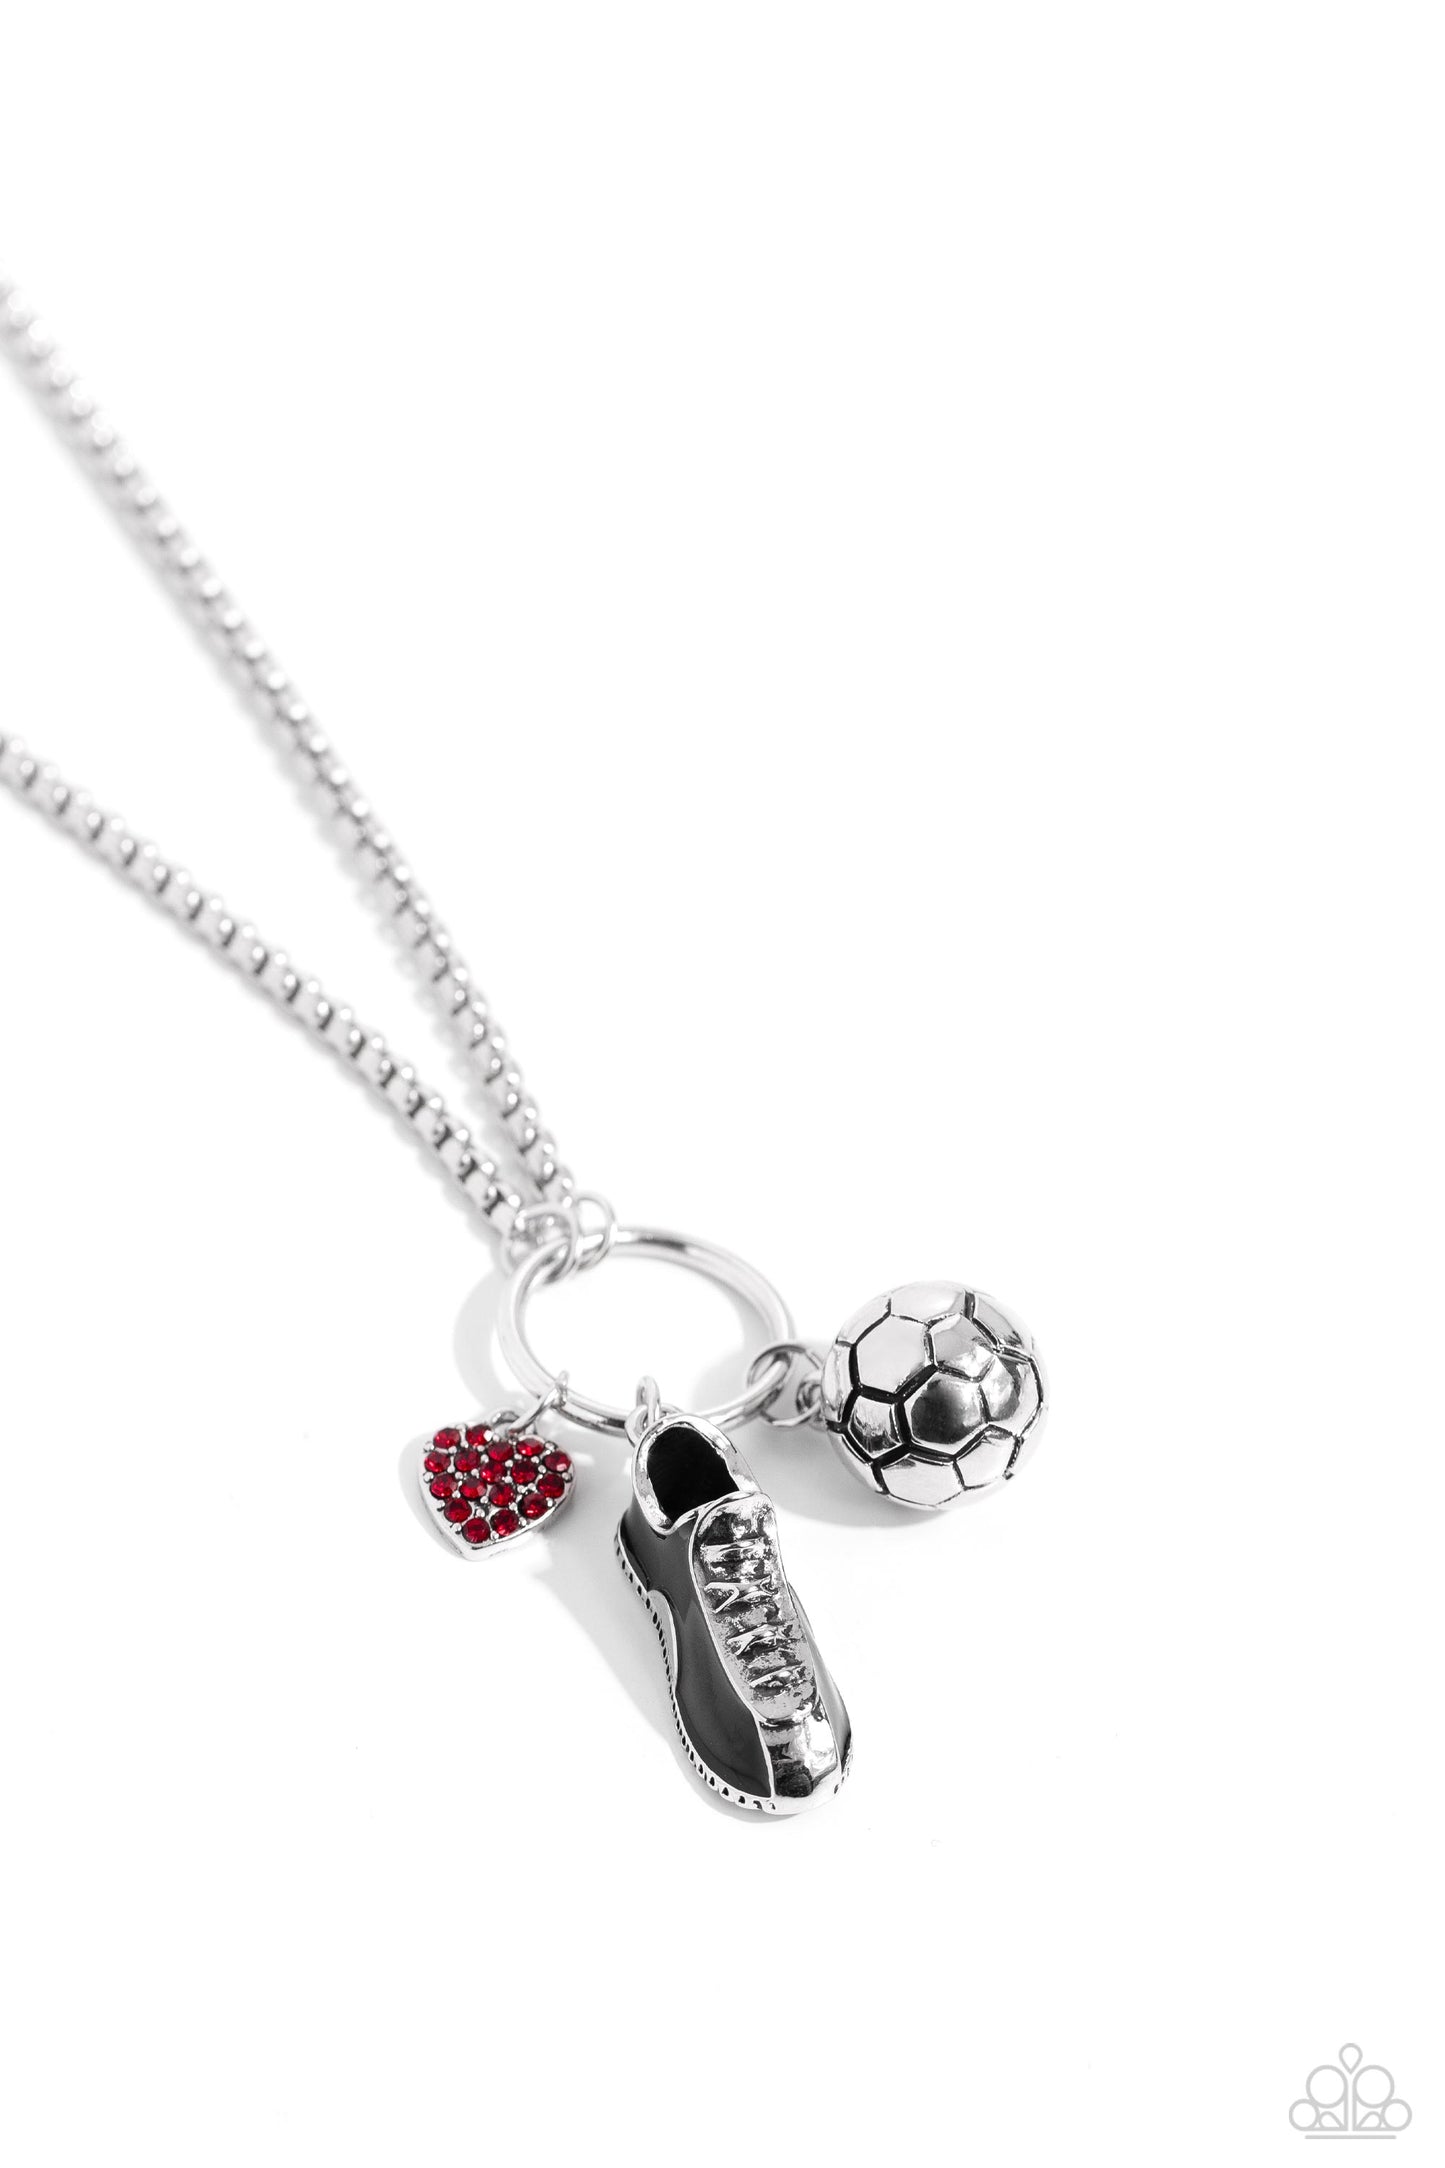 Corner Kick Red Necklace - Paparazzi Accessories  Dangling from a silver hoop attached to silver popcorn chains, three soccer-inspired charms, including a silver soccer ball, black-painted cleat, and red rhinestone-encrusted heart, swing for a sporty finish. Features an adjustable clasp closure.  Sold as one individual necklace. Includes one pair of matching earrings.  P2WH-RDXX-341XX